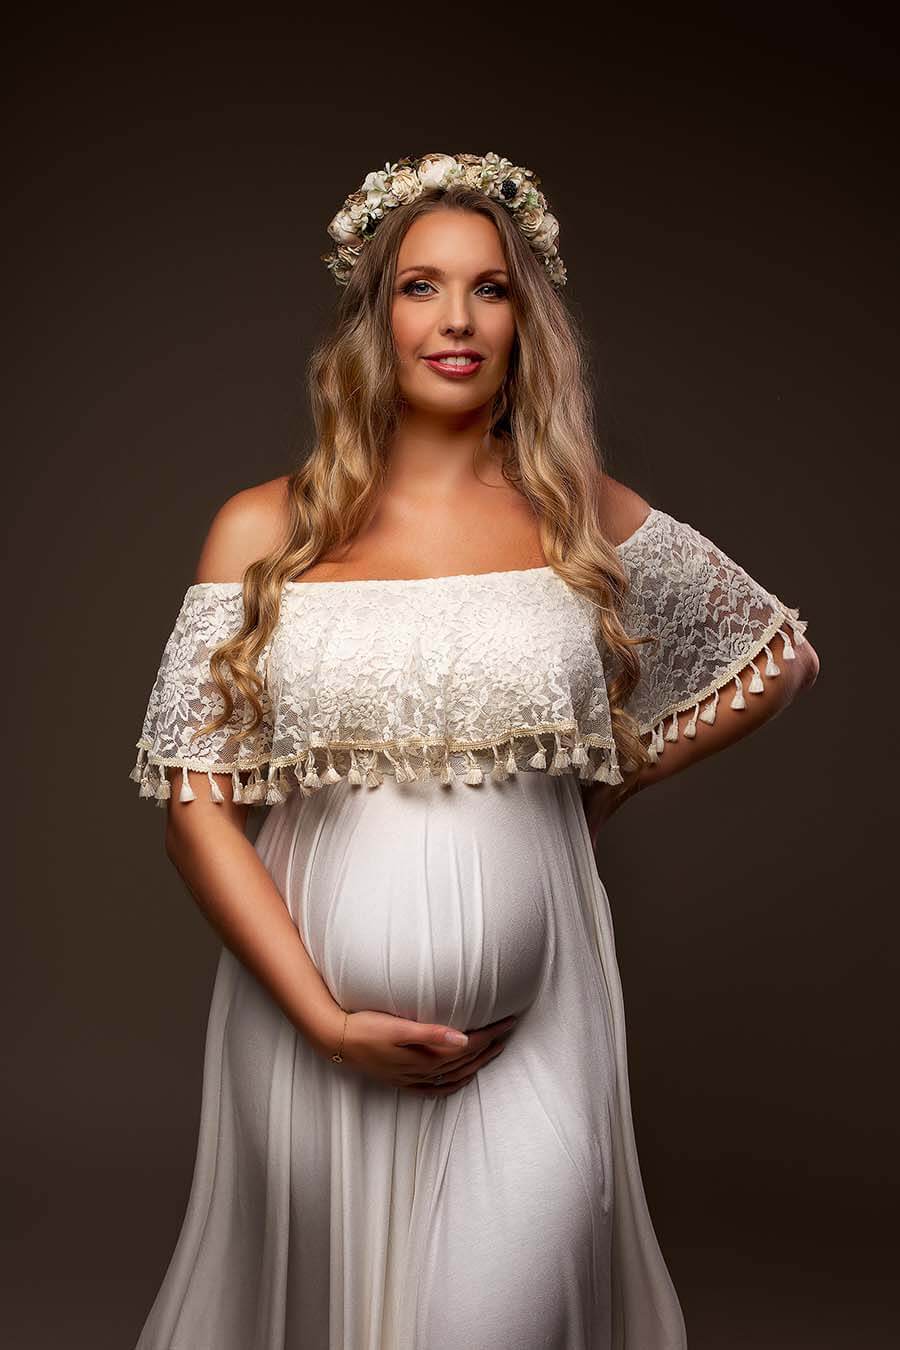 Blond pregnant model poses in a studio with the Boho Catania Maternity Dress with a flower gown. The photo is a close up on the top from the dress and a split on the side. The top is strapless with elegant lace and vintage brocante details at the ending.